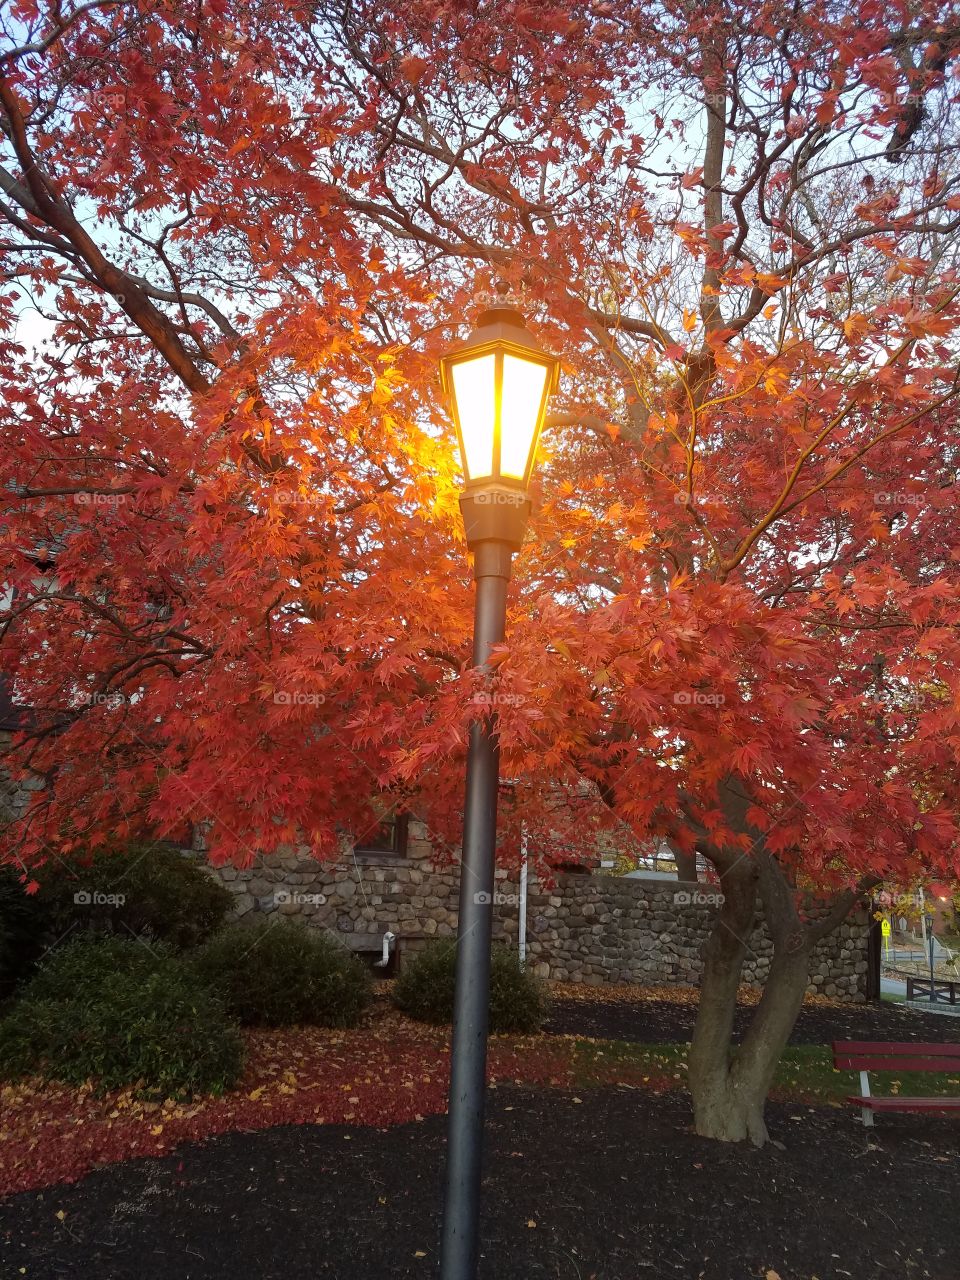 Autumn leaves and lamp